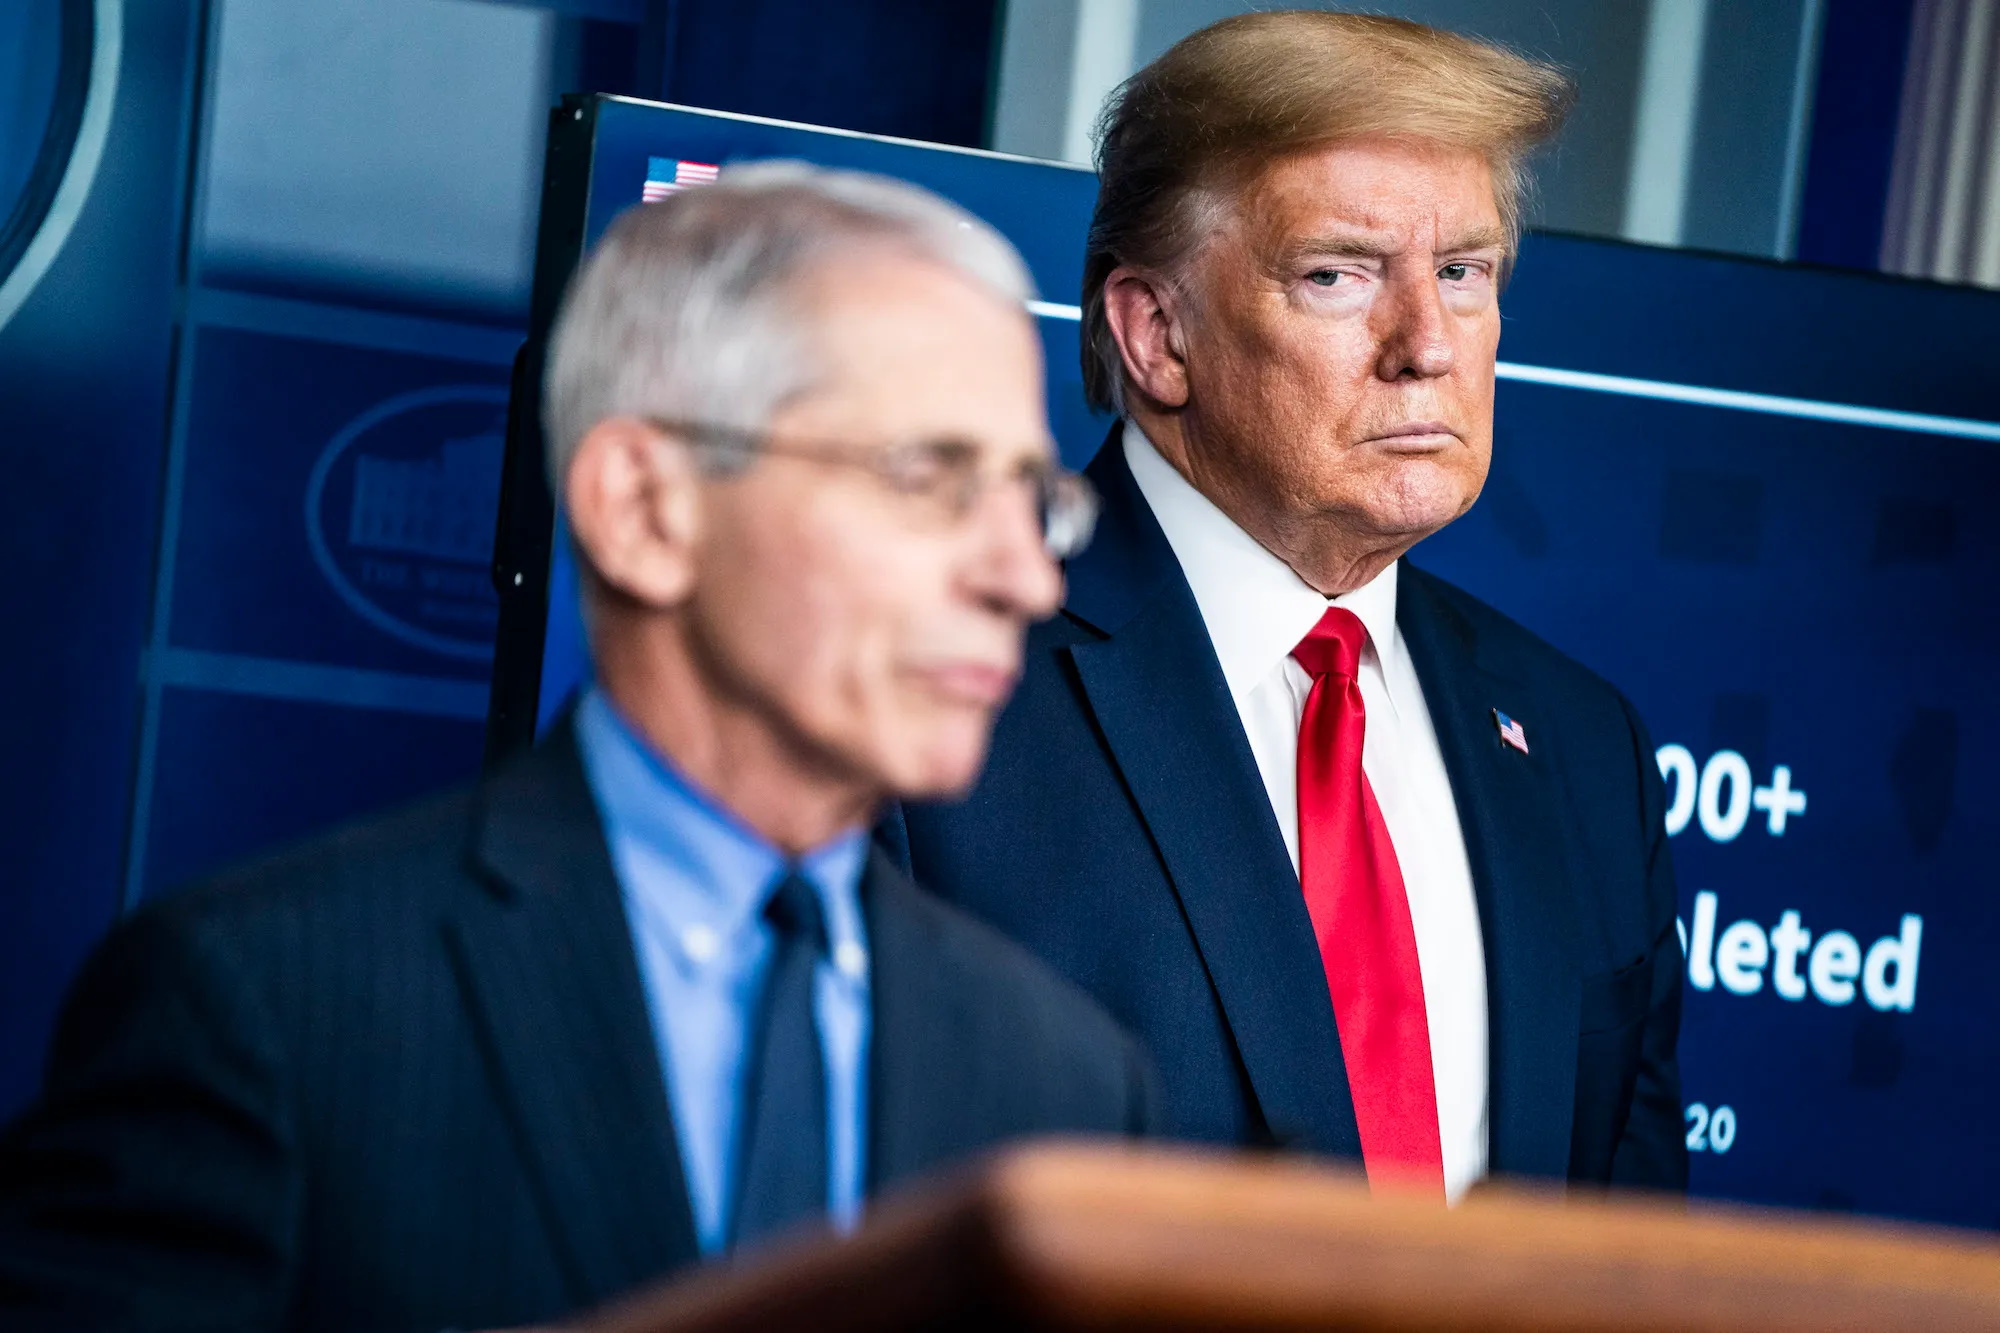 Donald Trump glares at Dr. Anthony Fauci during a coronavirus press conference in April 2020. Photo: Jabin Botsford / The Washington Post / Getty Images